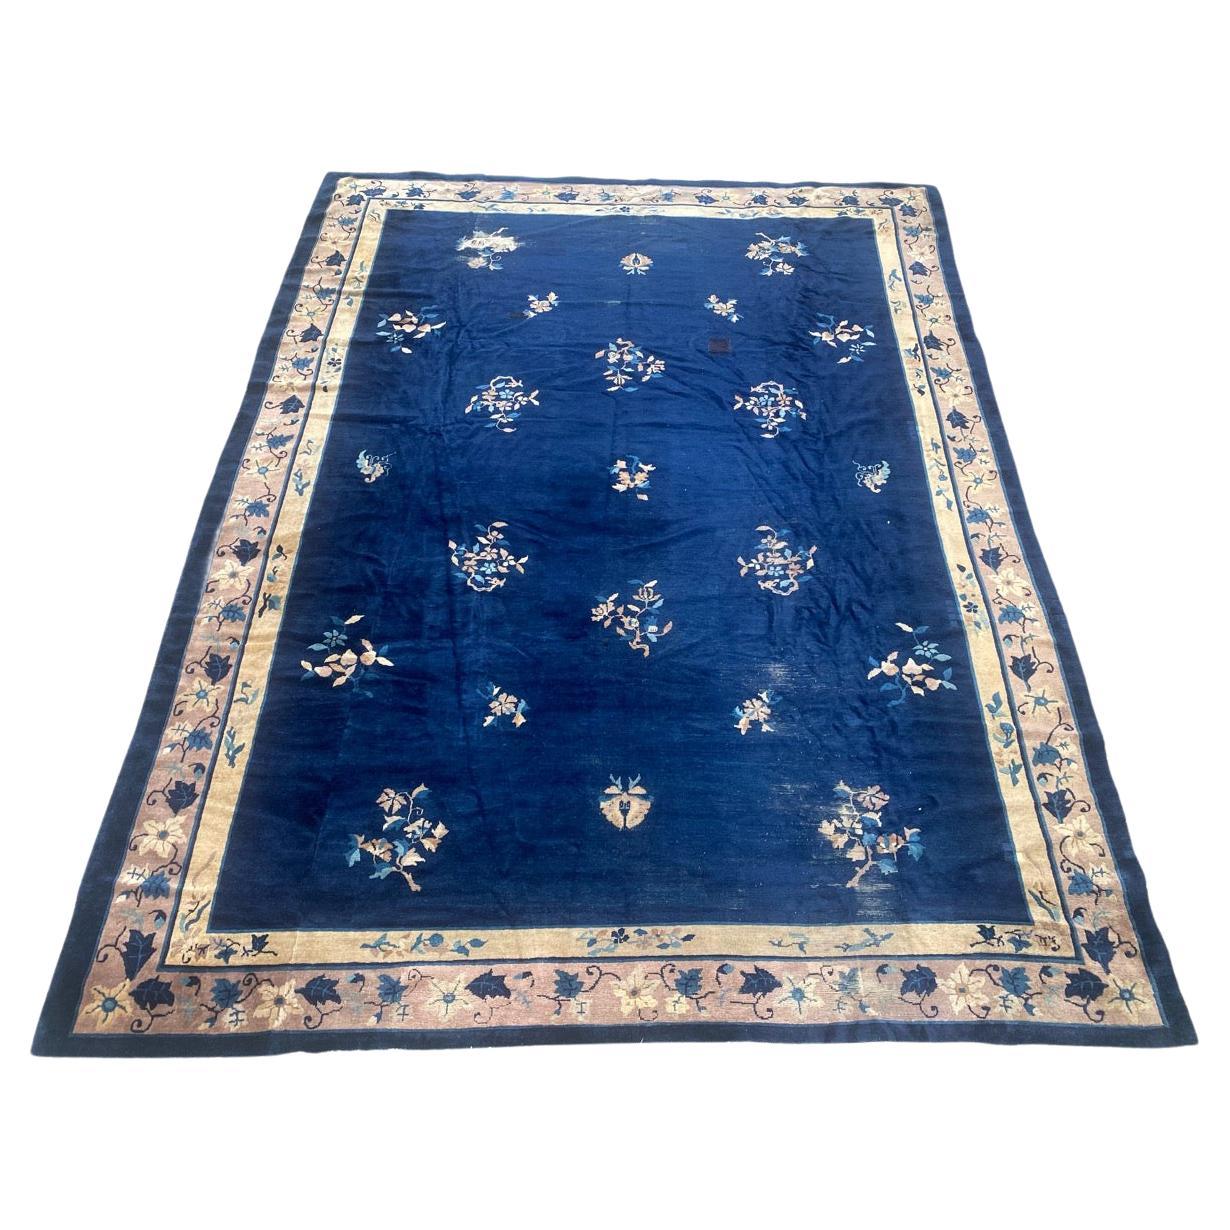 Bobyrug's Pretty Large Antique Chinese Art Deco Rug